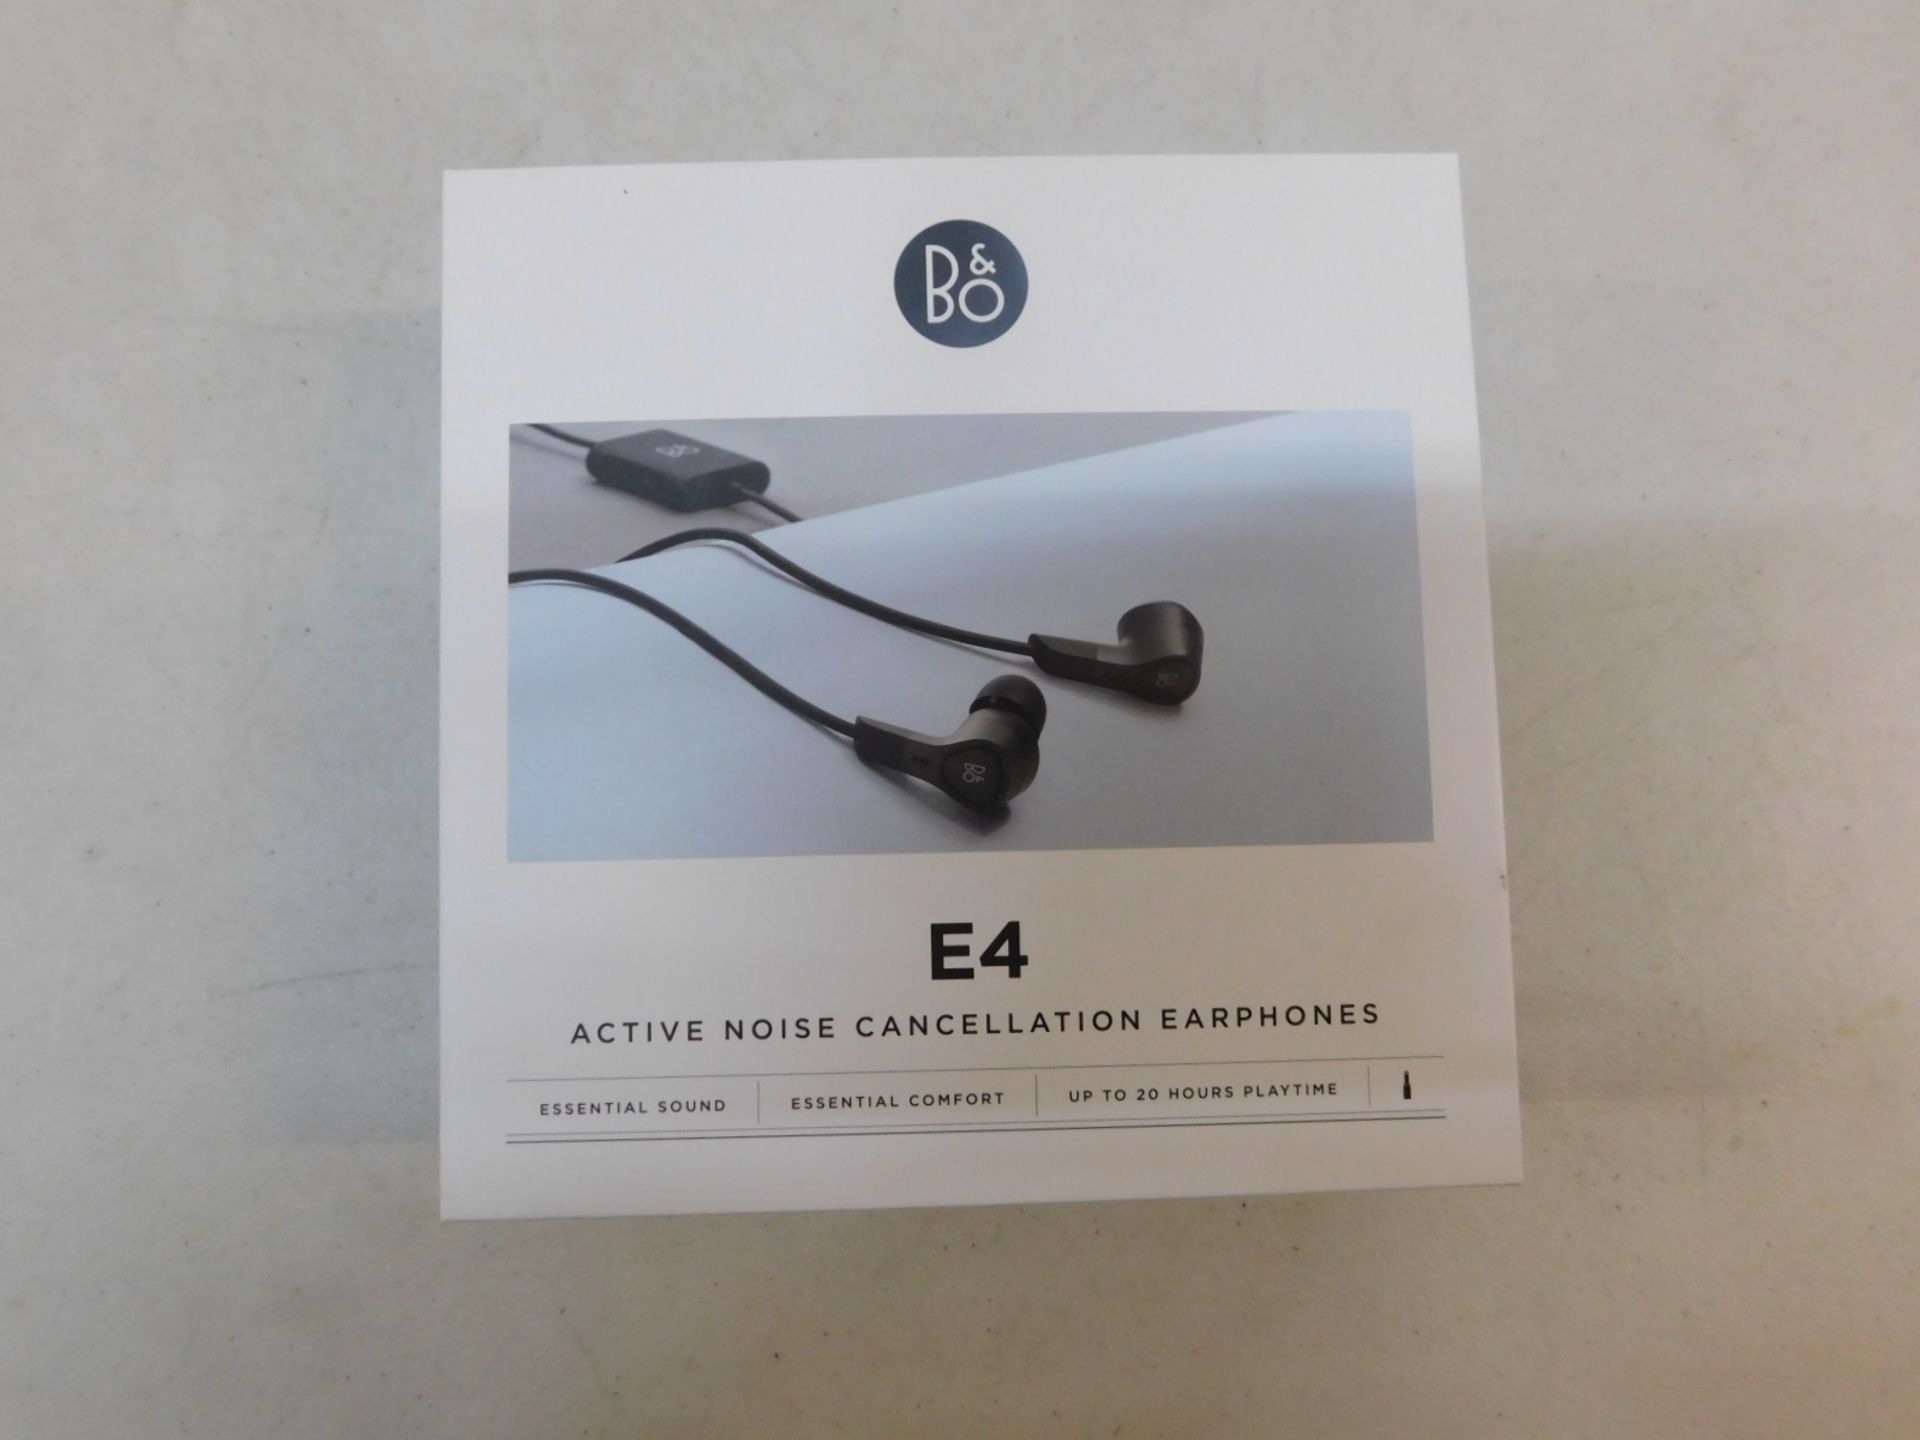 1 BOXED BANG & OLUFSEN BEOPLAY E4 ADVANCED ACTIVE NOISE CANCELLING EARPHONES - BLACK RRP Â£99